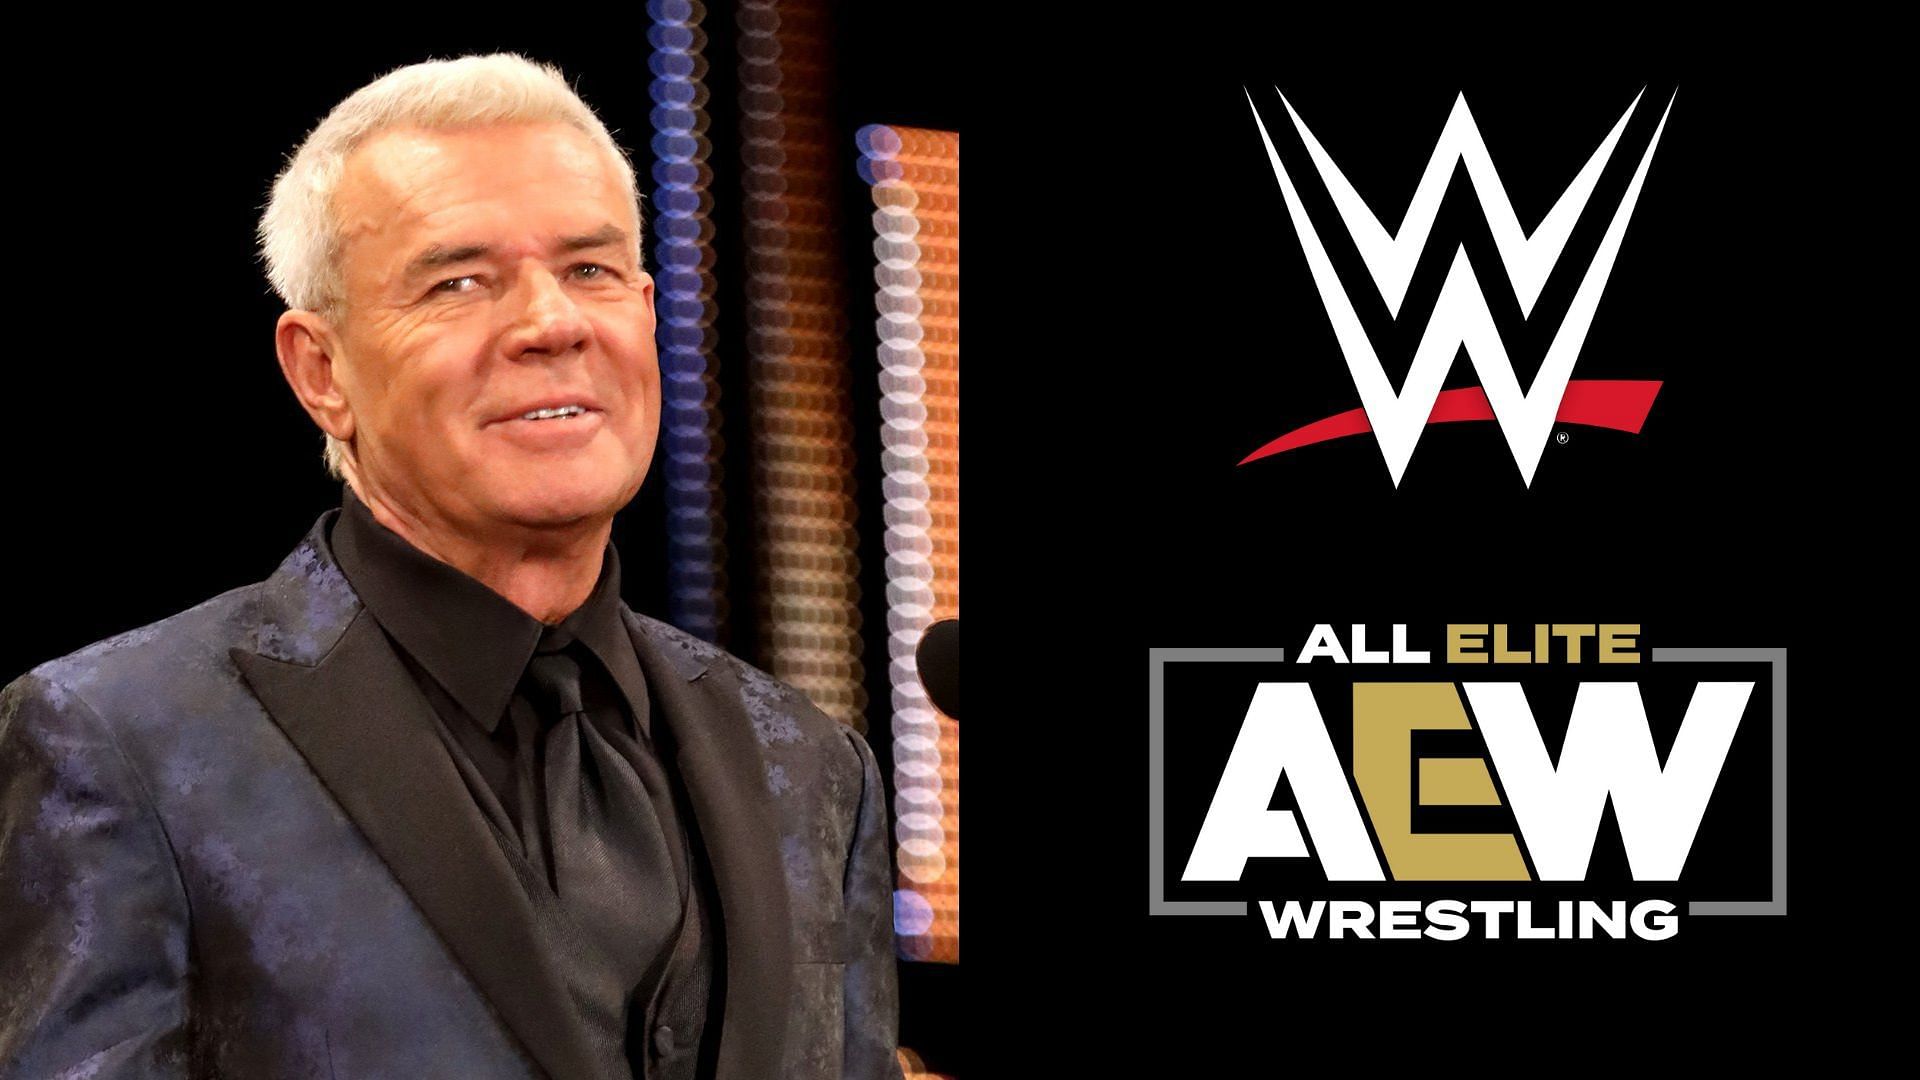 Eric Bischoff used to work for WWE